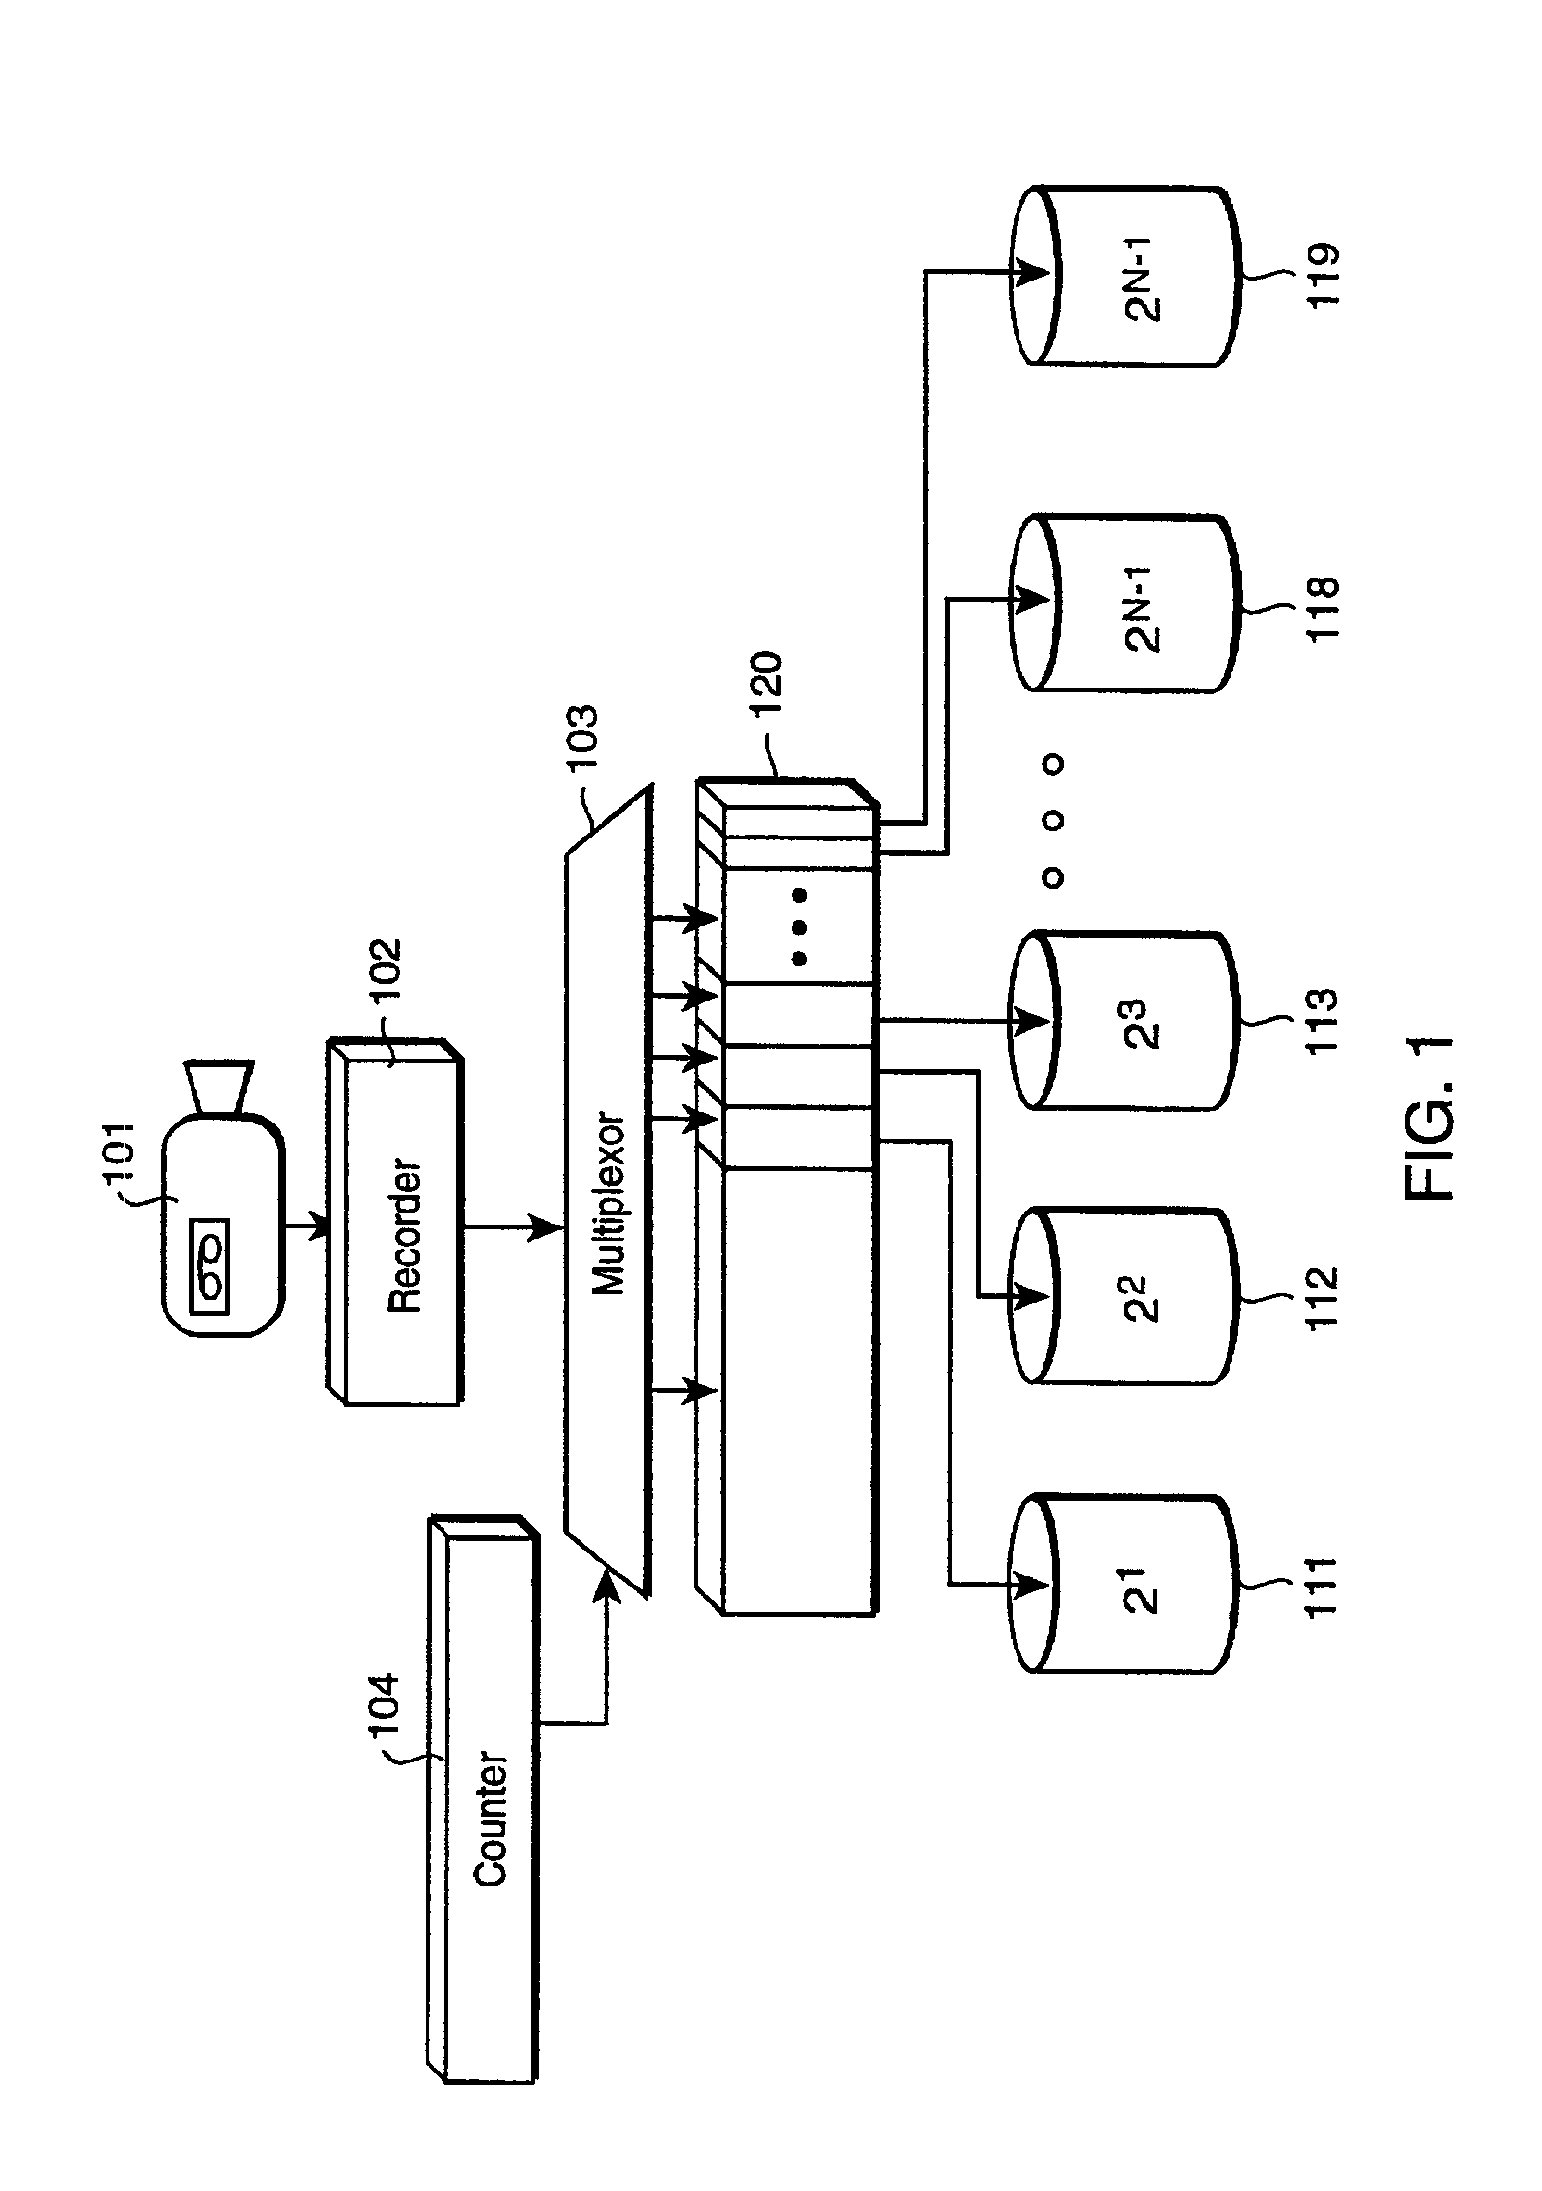 Exponential storage system and method